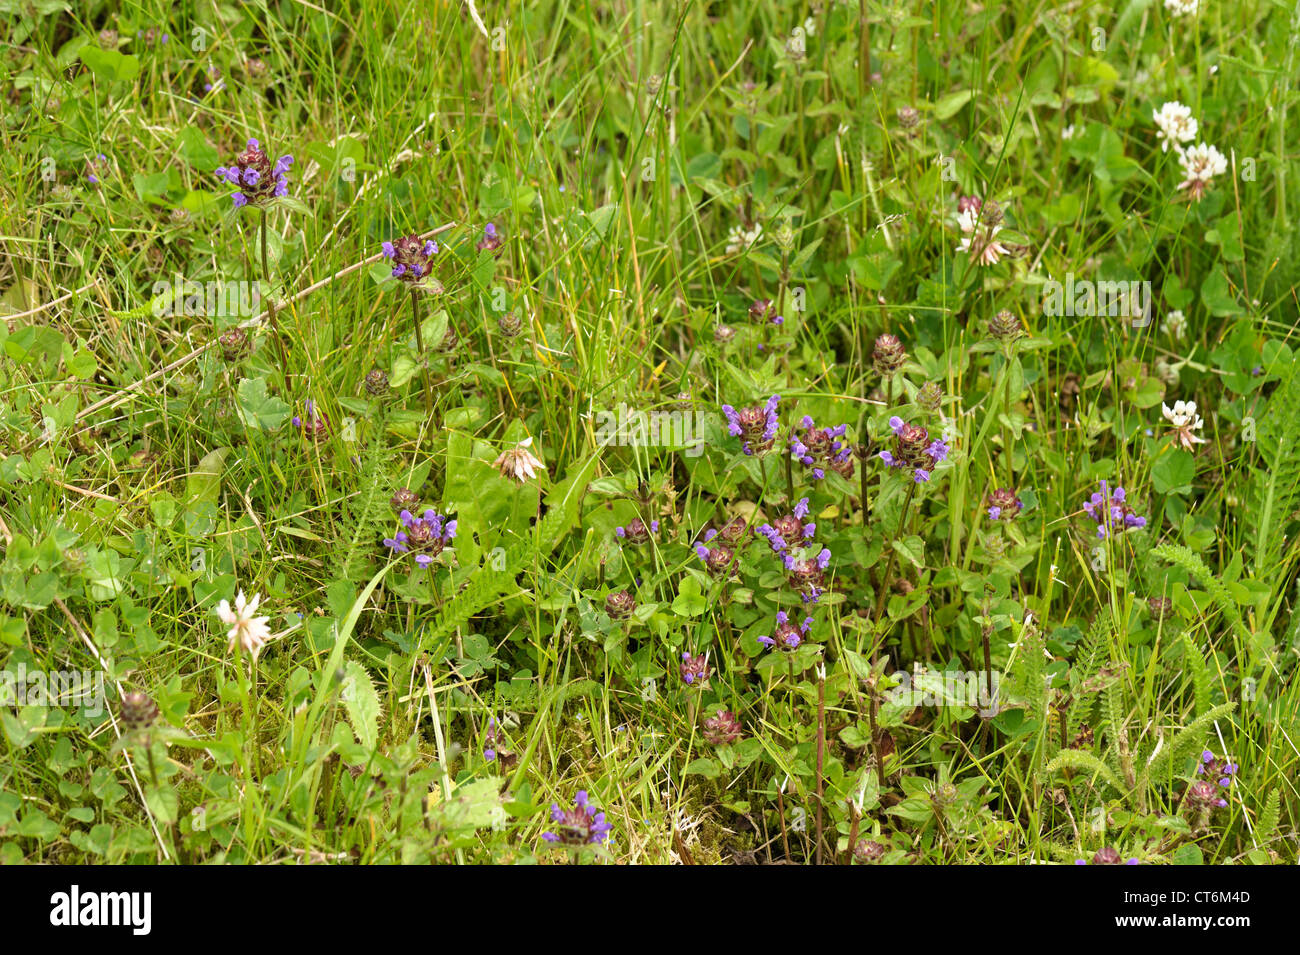 Self-heal (Prunella vulgaris) flowering plants with other weeds in rough cut garden lawn Stock Photo